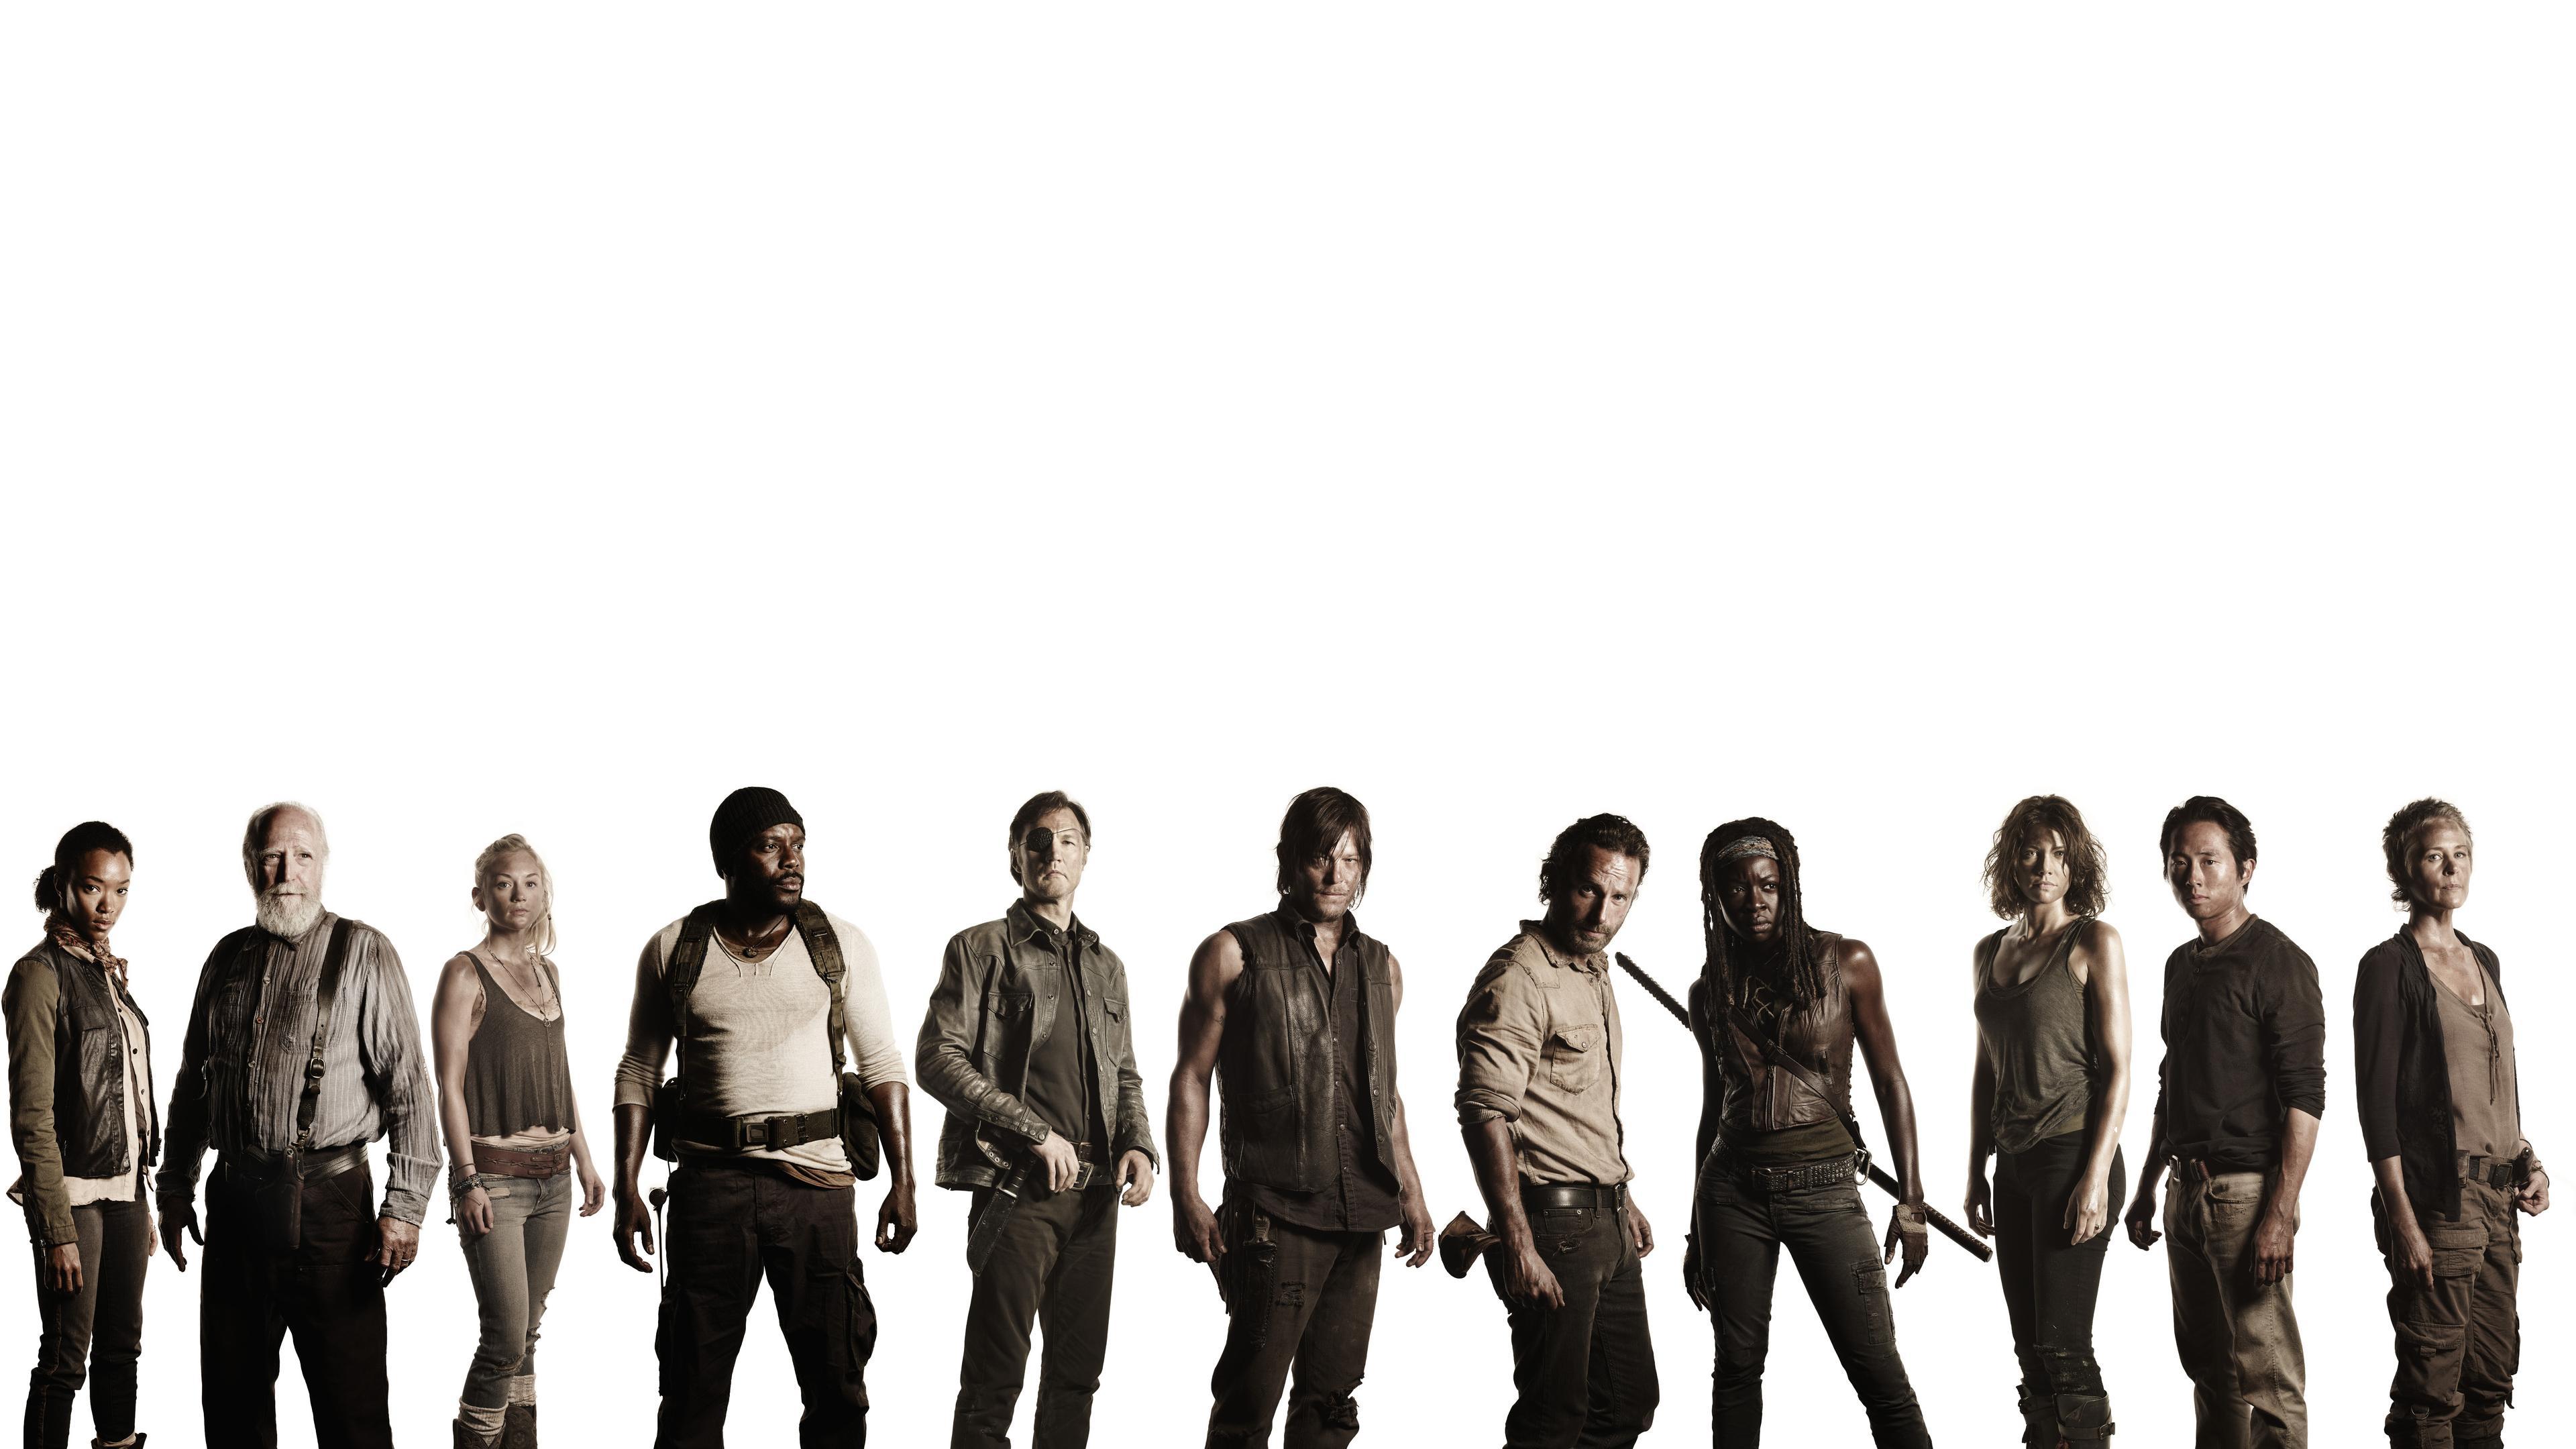 TV Show The Walking Dead Wallpaper 3840x2160 px Free Download